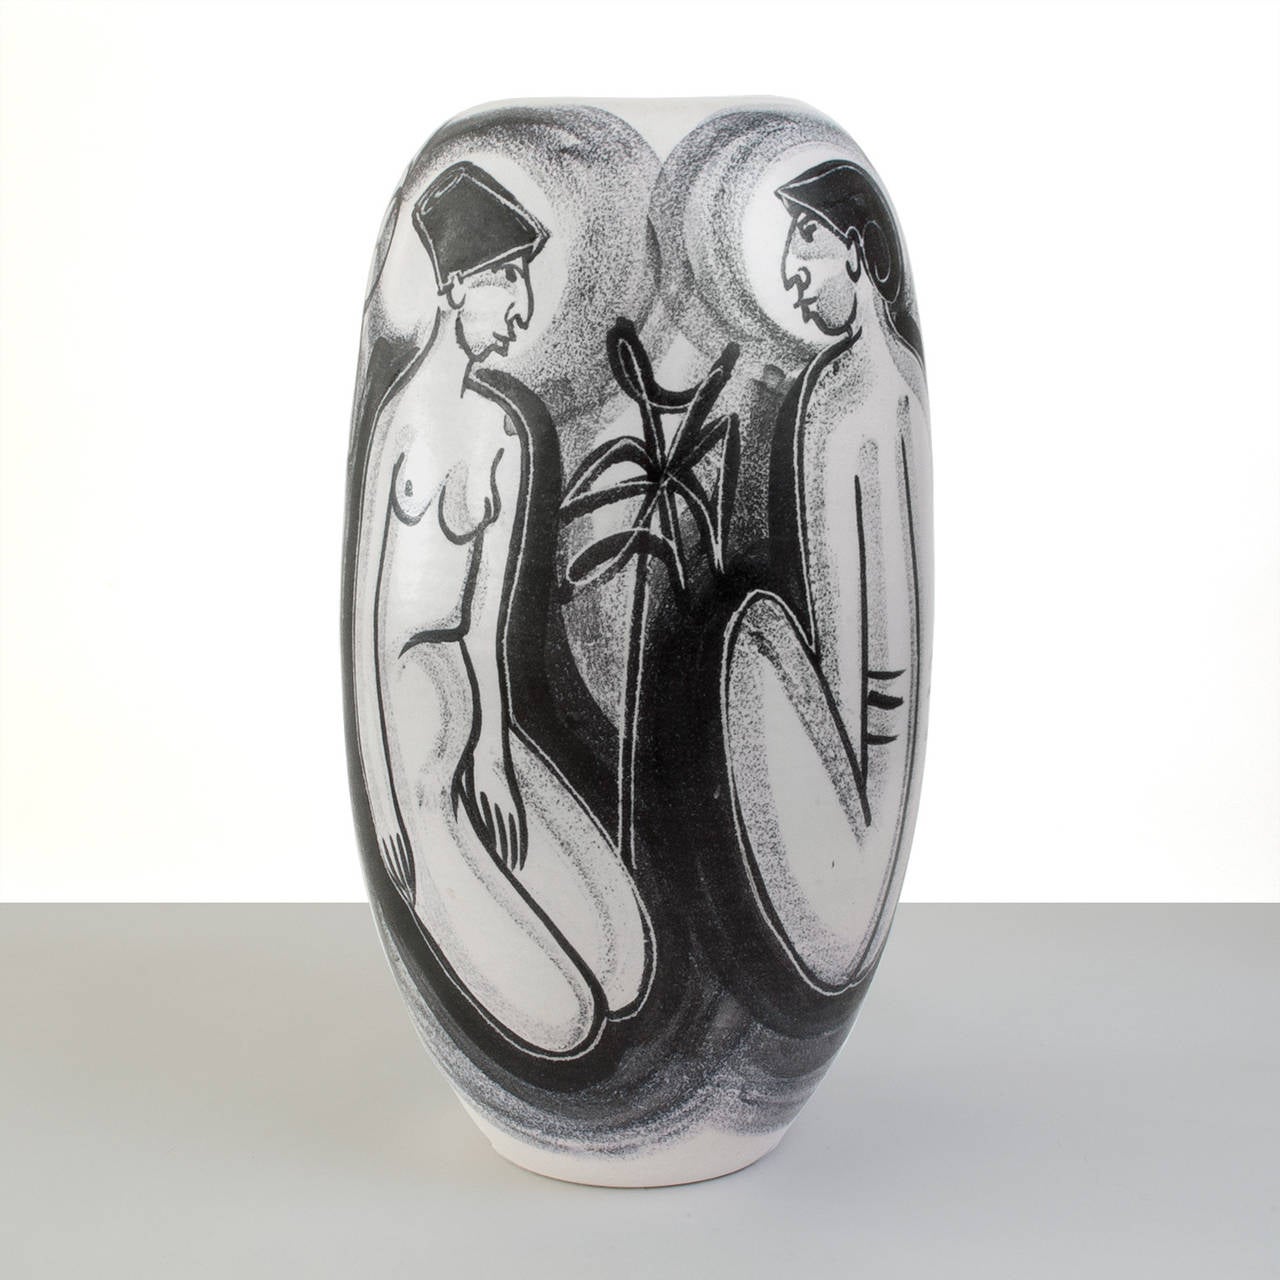 Mid-Century hand decorated ceramic vase by Danish artist Mette Doller on a form by Erik Ivarsson for the Swedish company Andersson & Johansson - Höganäs Ceramic, circa 1950's.  The vase artistically depicts four figures possibly Mayan wearing hats